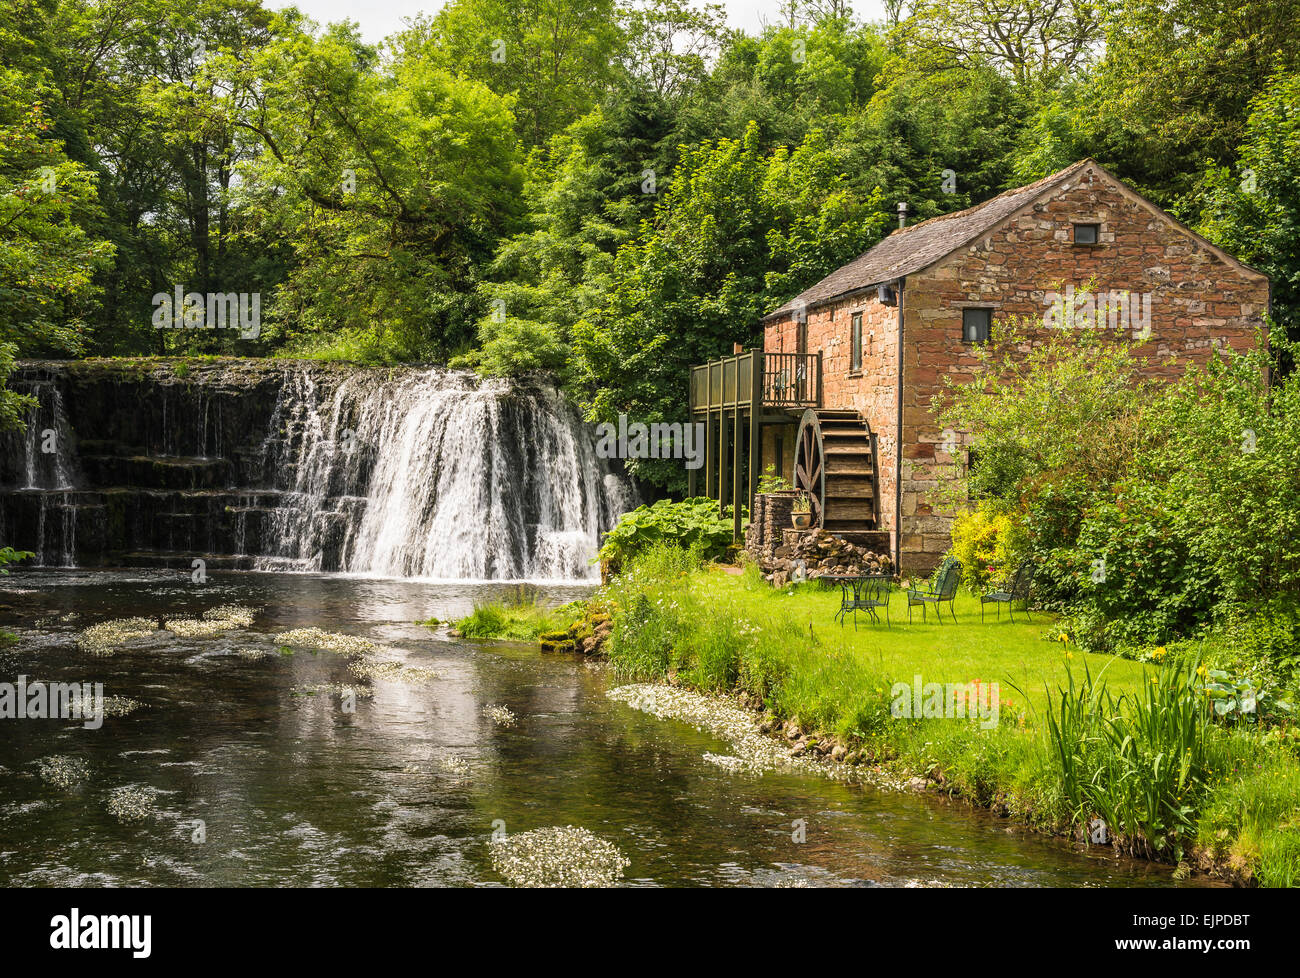 A quintessentially idyllic English rural scene with the Rutter Force waterfall and old watermill Stock Photo